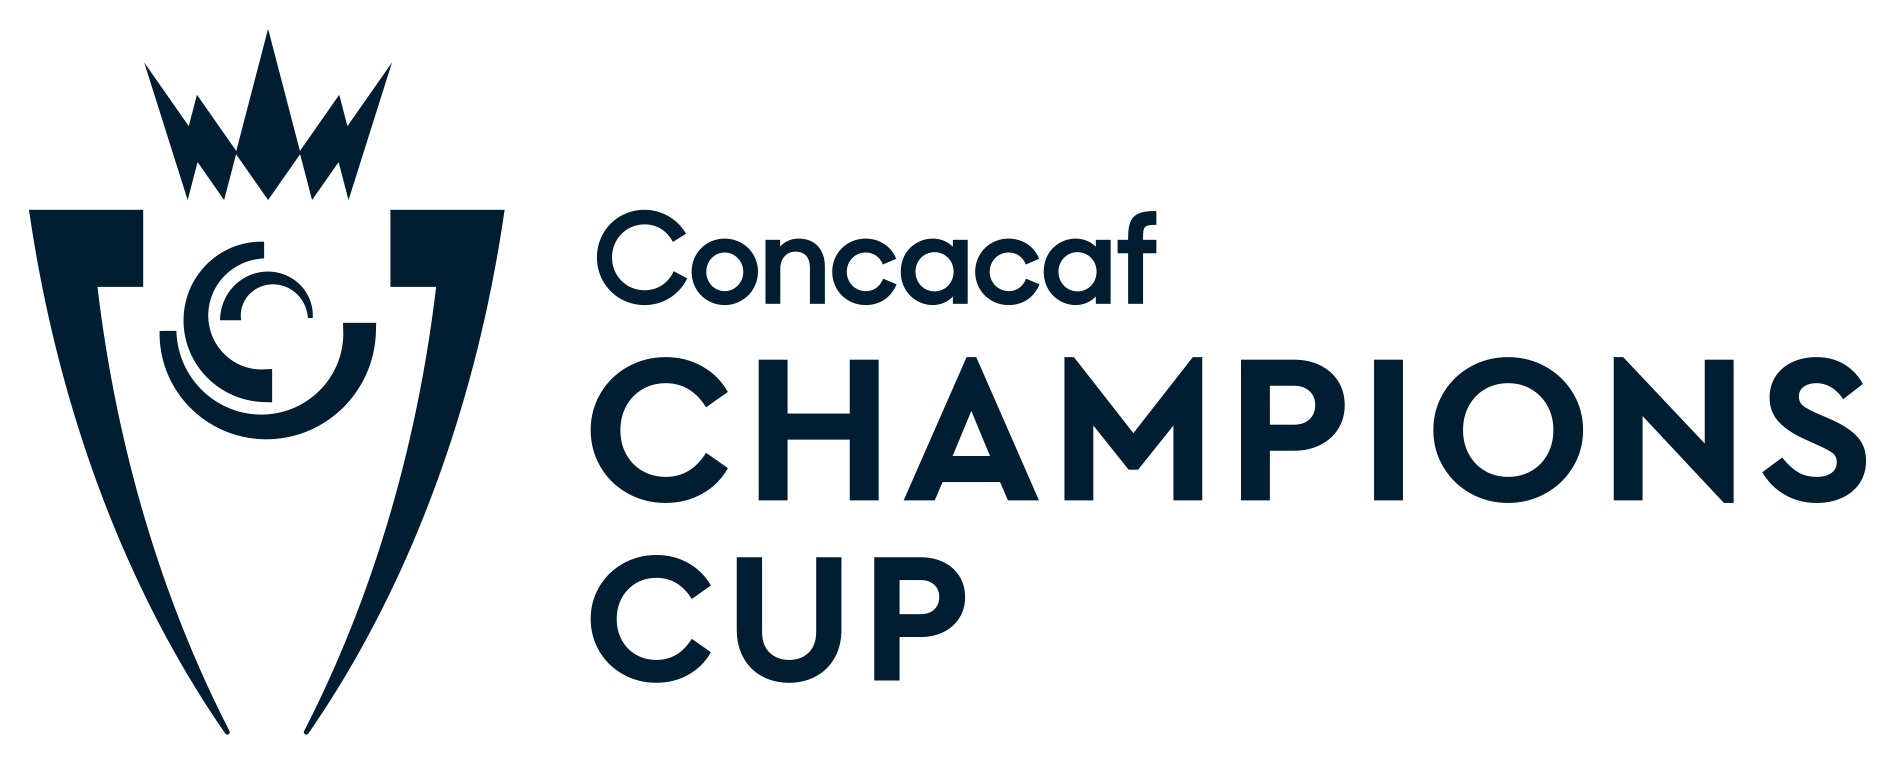 Six Central American clubs secure berths in 2023 SCCL